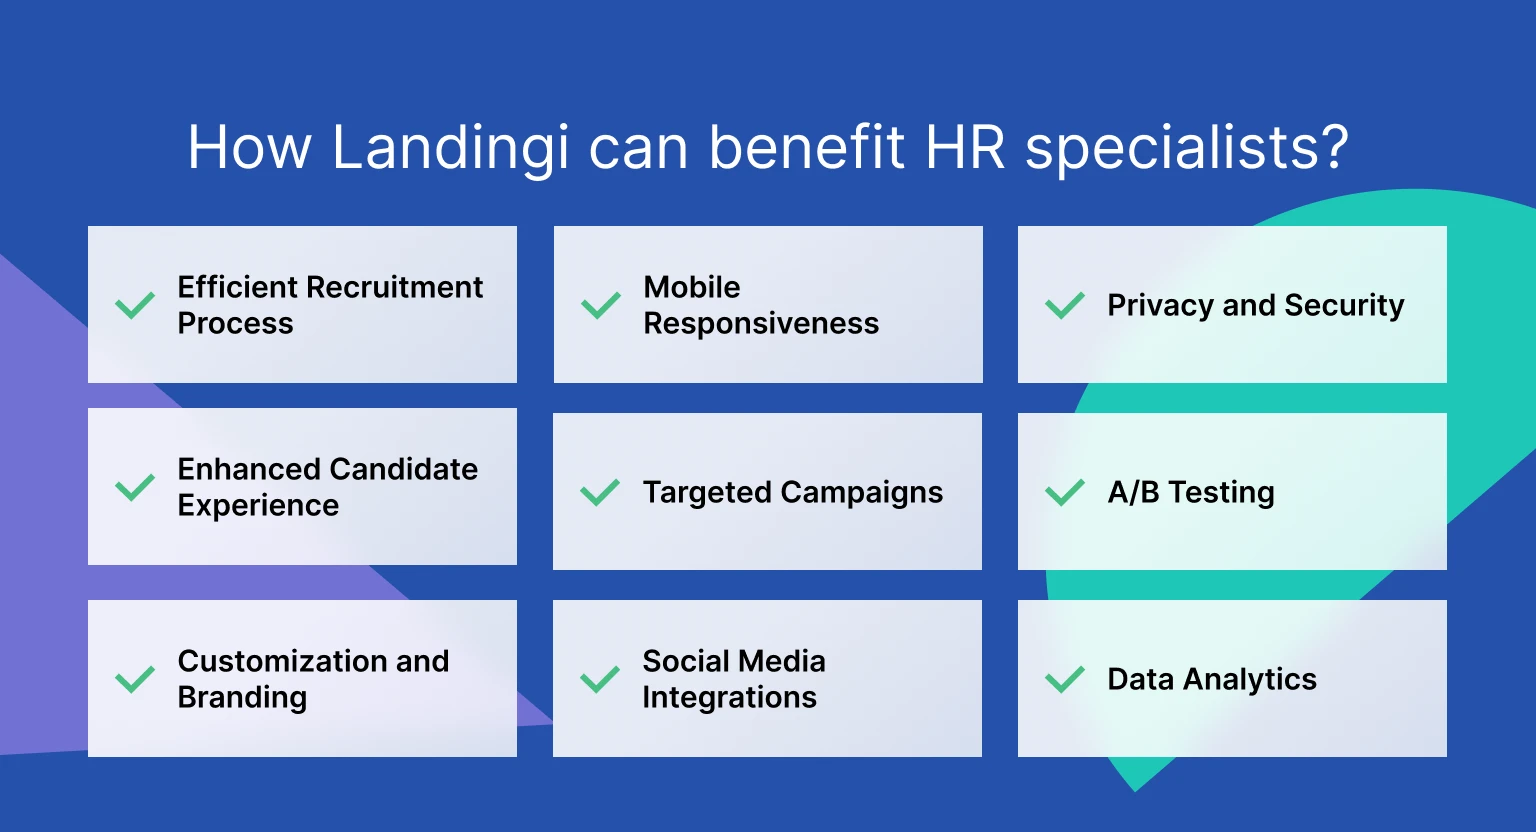 List of benefits for HR specialists